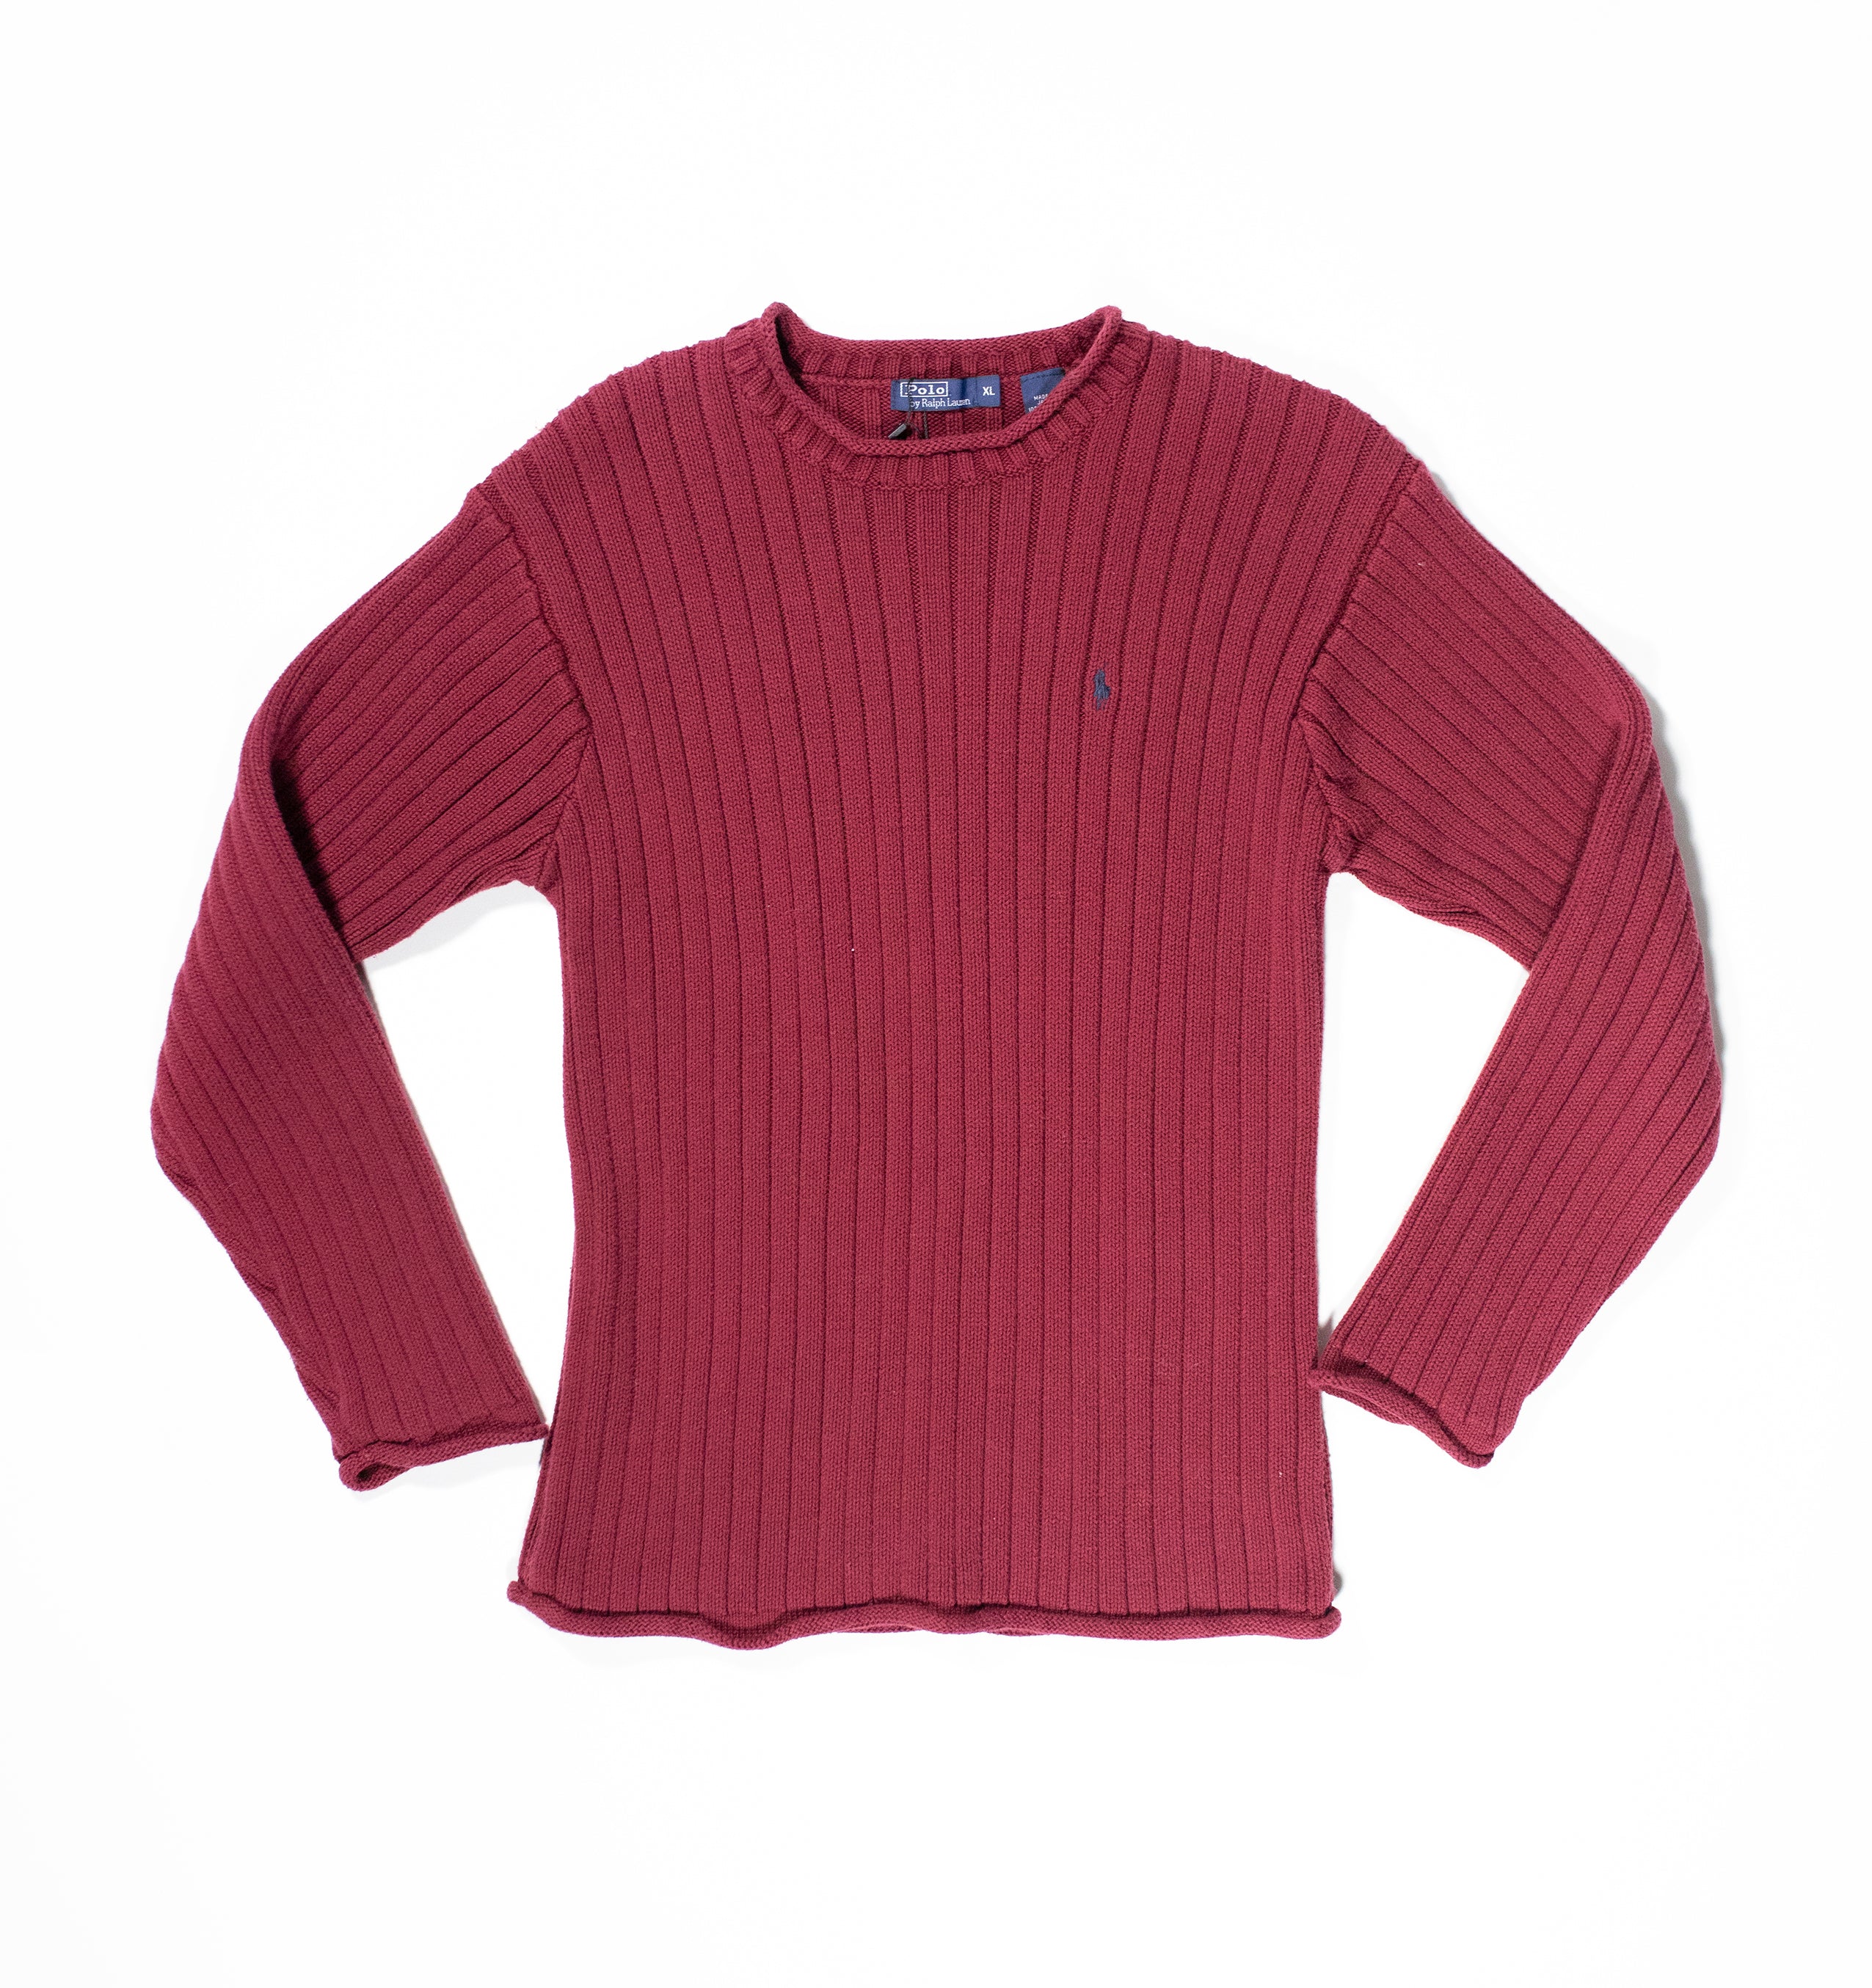 Red Thick Knit Sweater